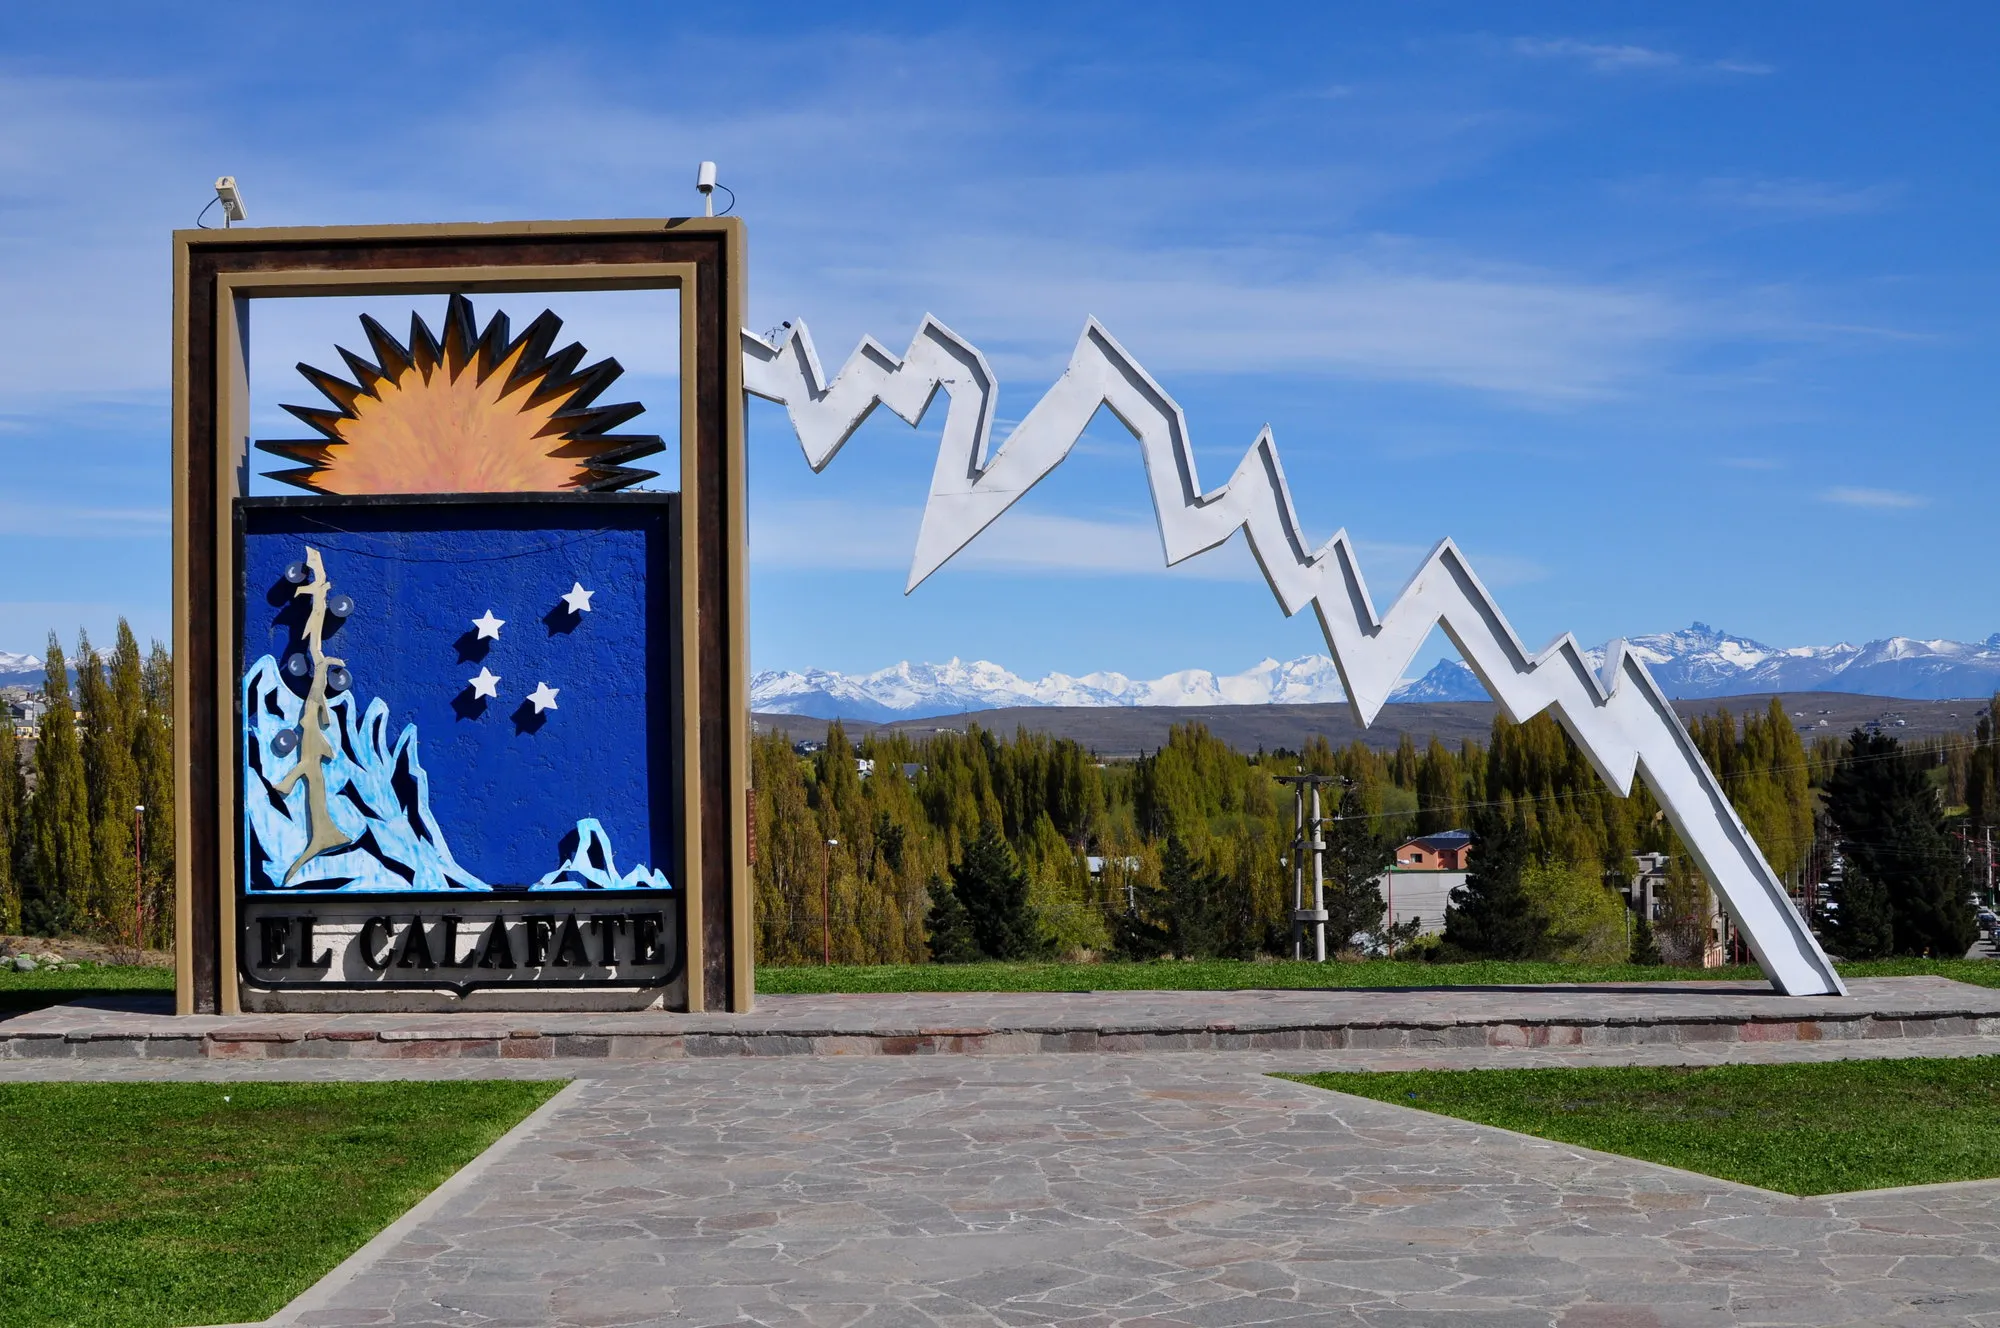 El Calafate Poster in Argentina, South America | Monuments - Rated 3.7